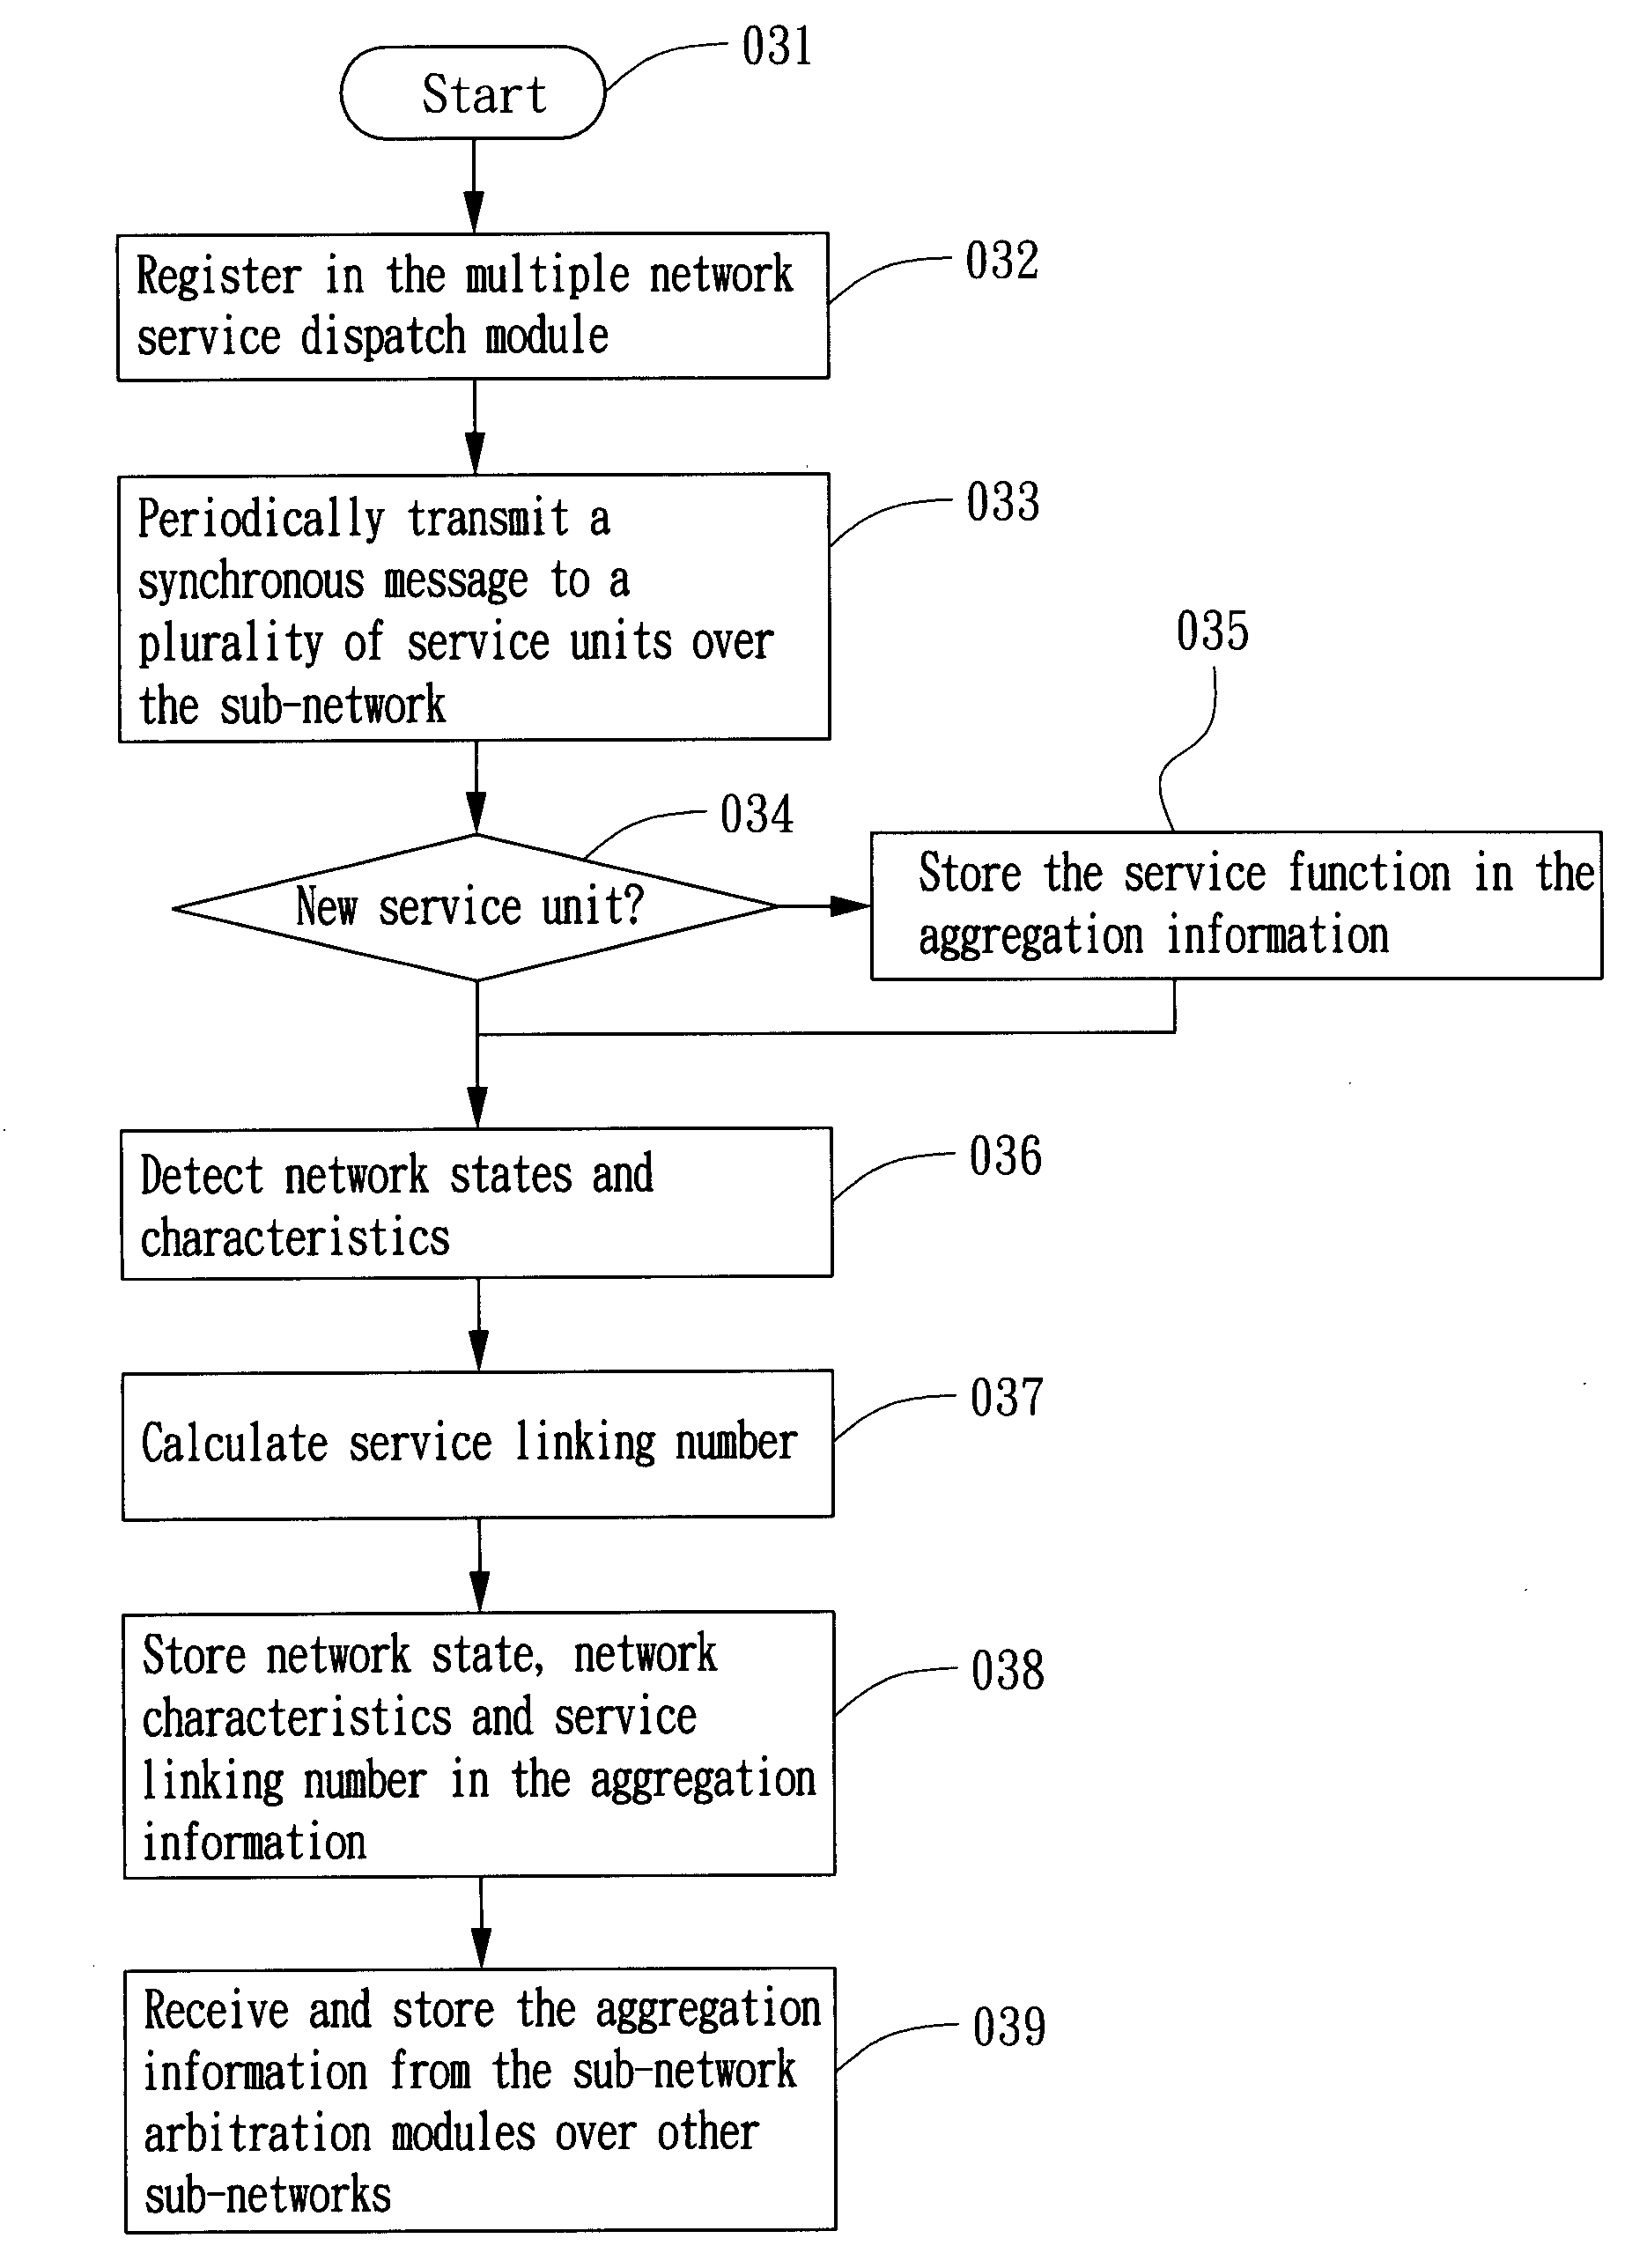 Multiple service method and device over heterogenous networks